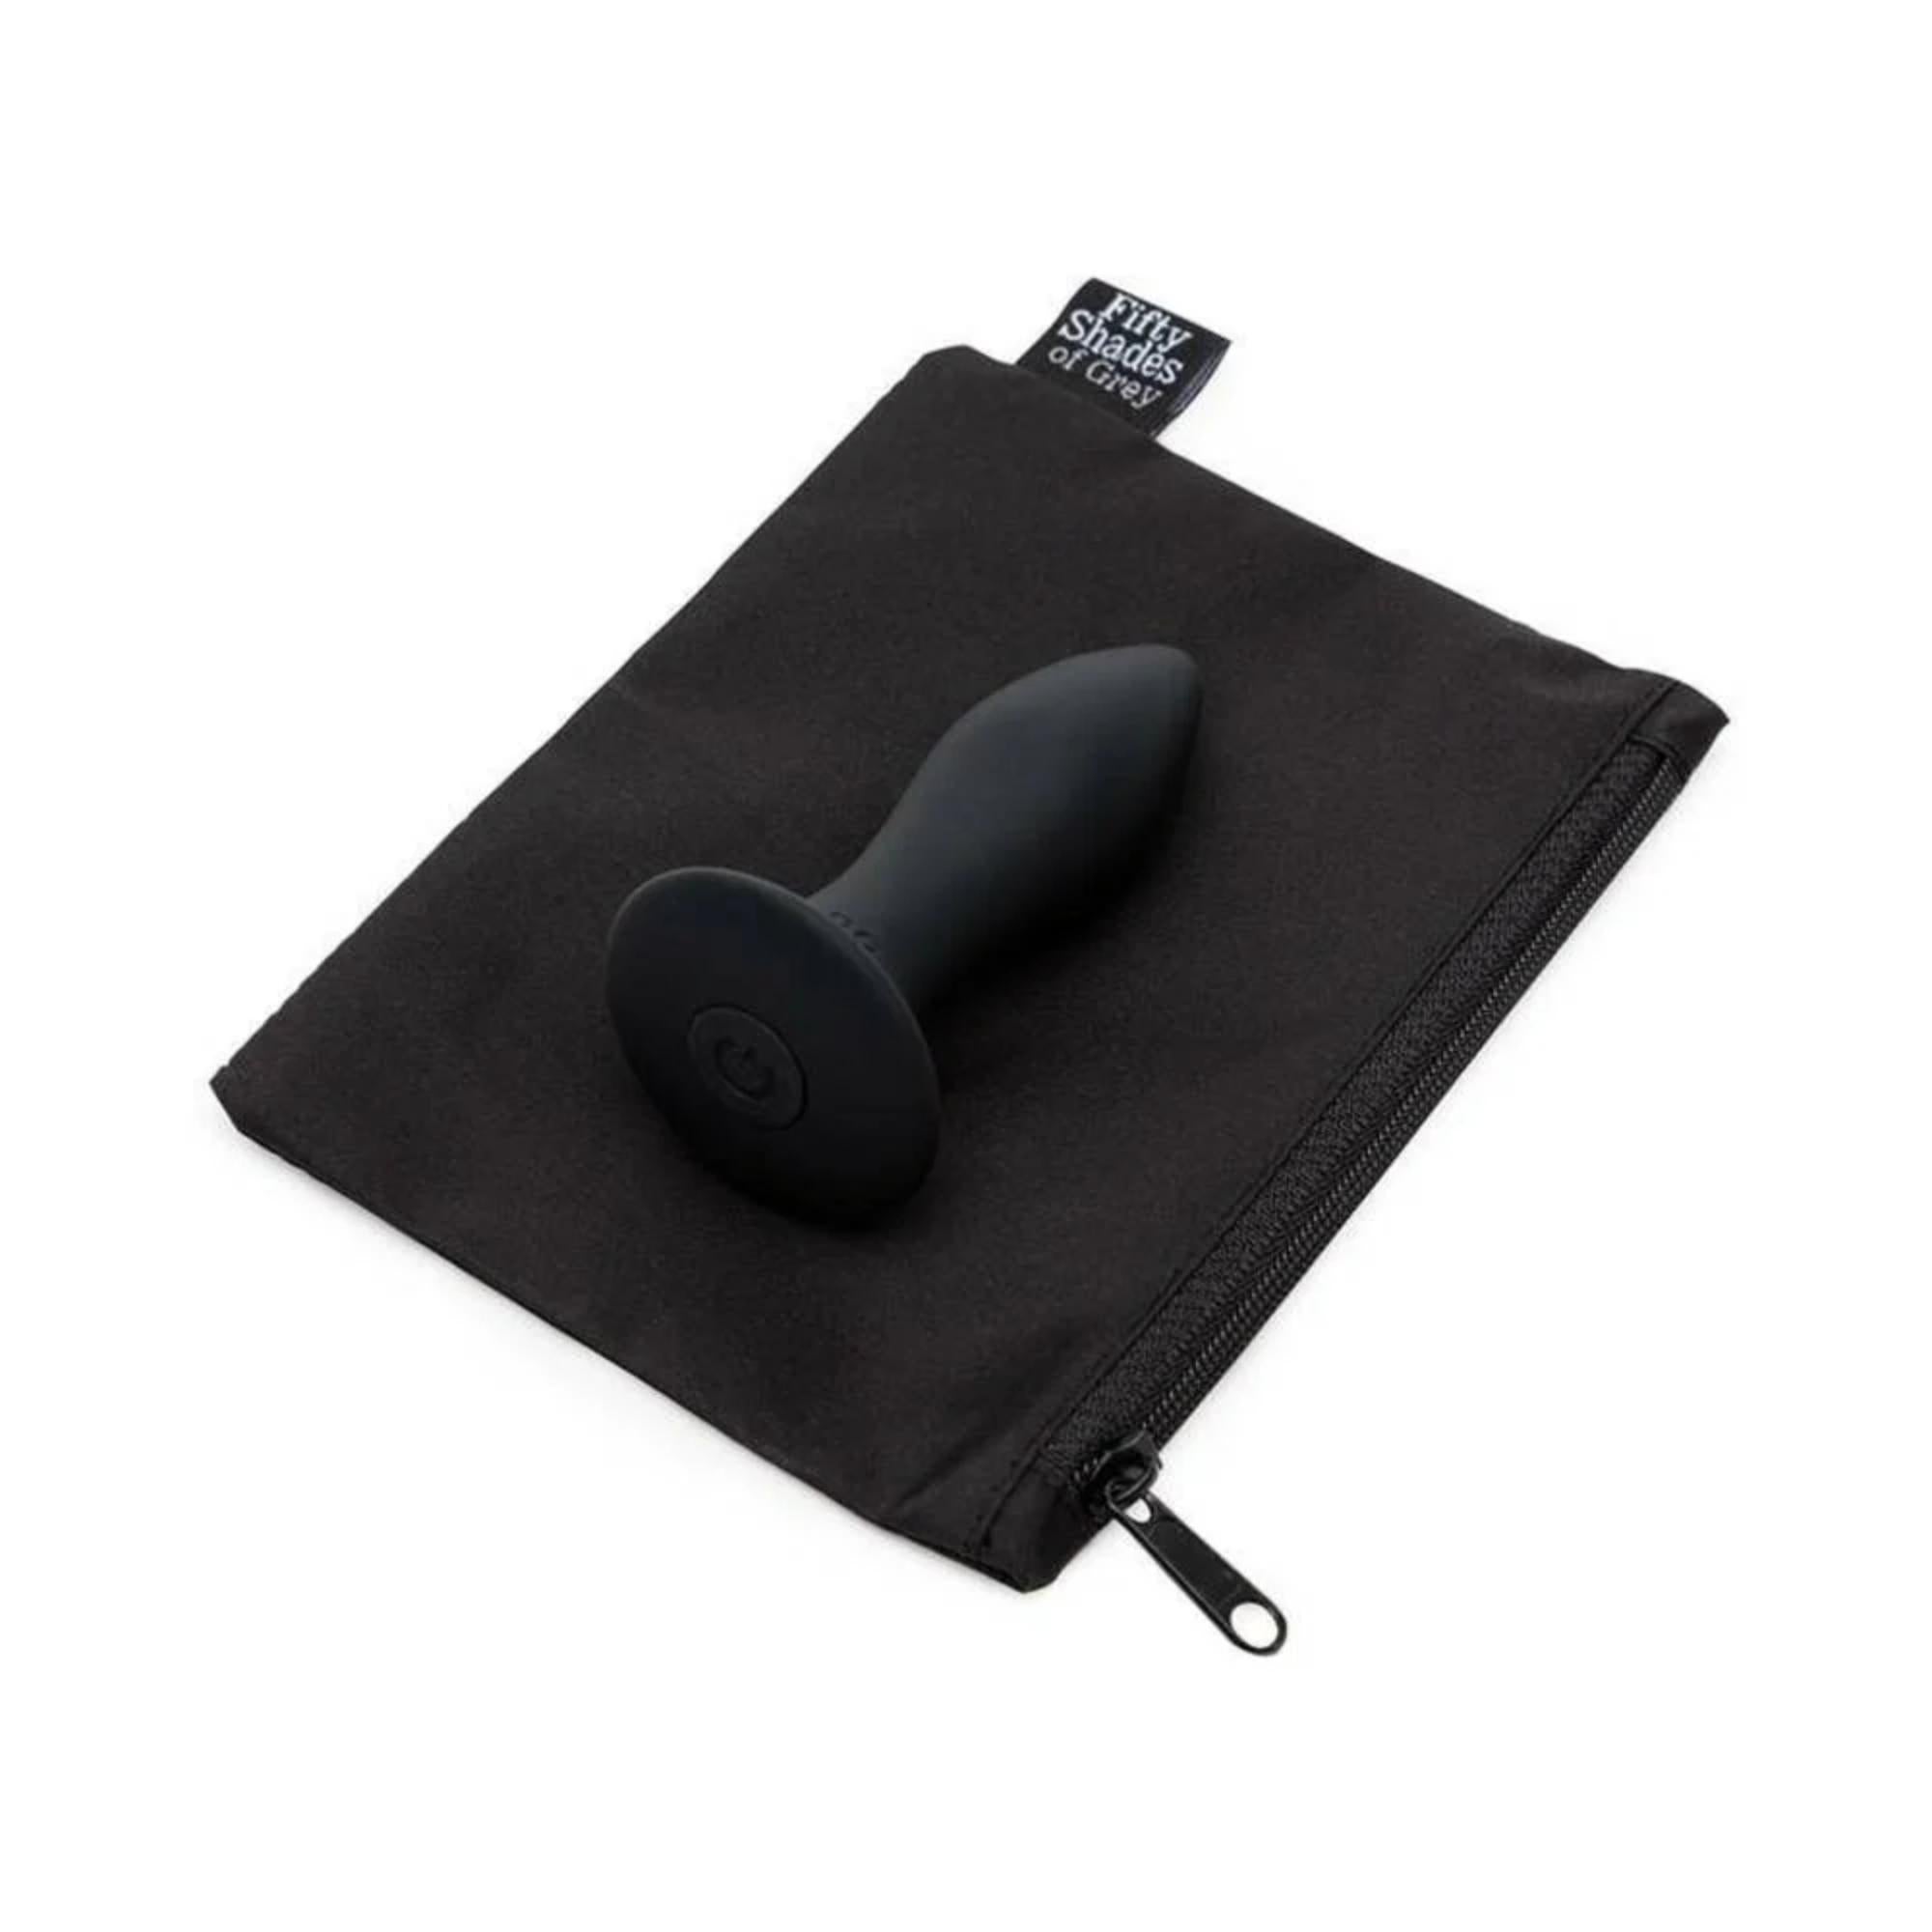 Fifty Shades of Grey Sensation Rechargeable Silicone Vibrating Butt Plug